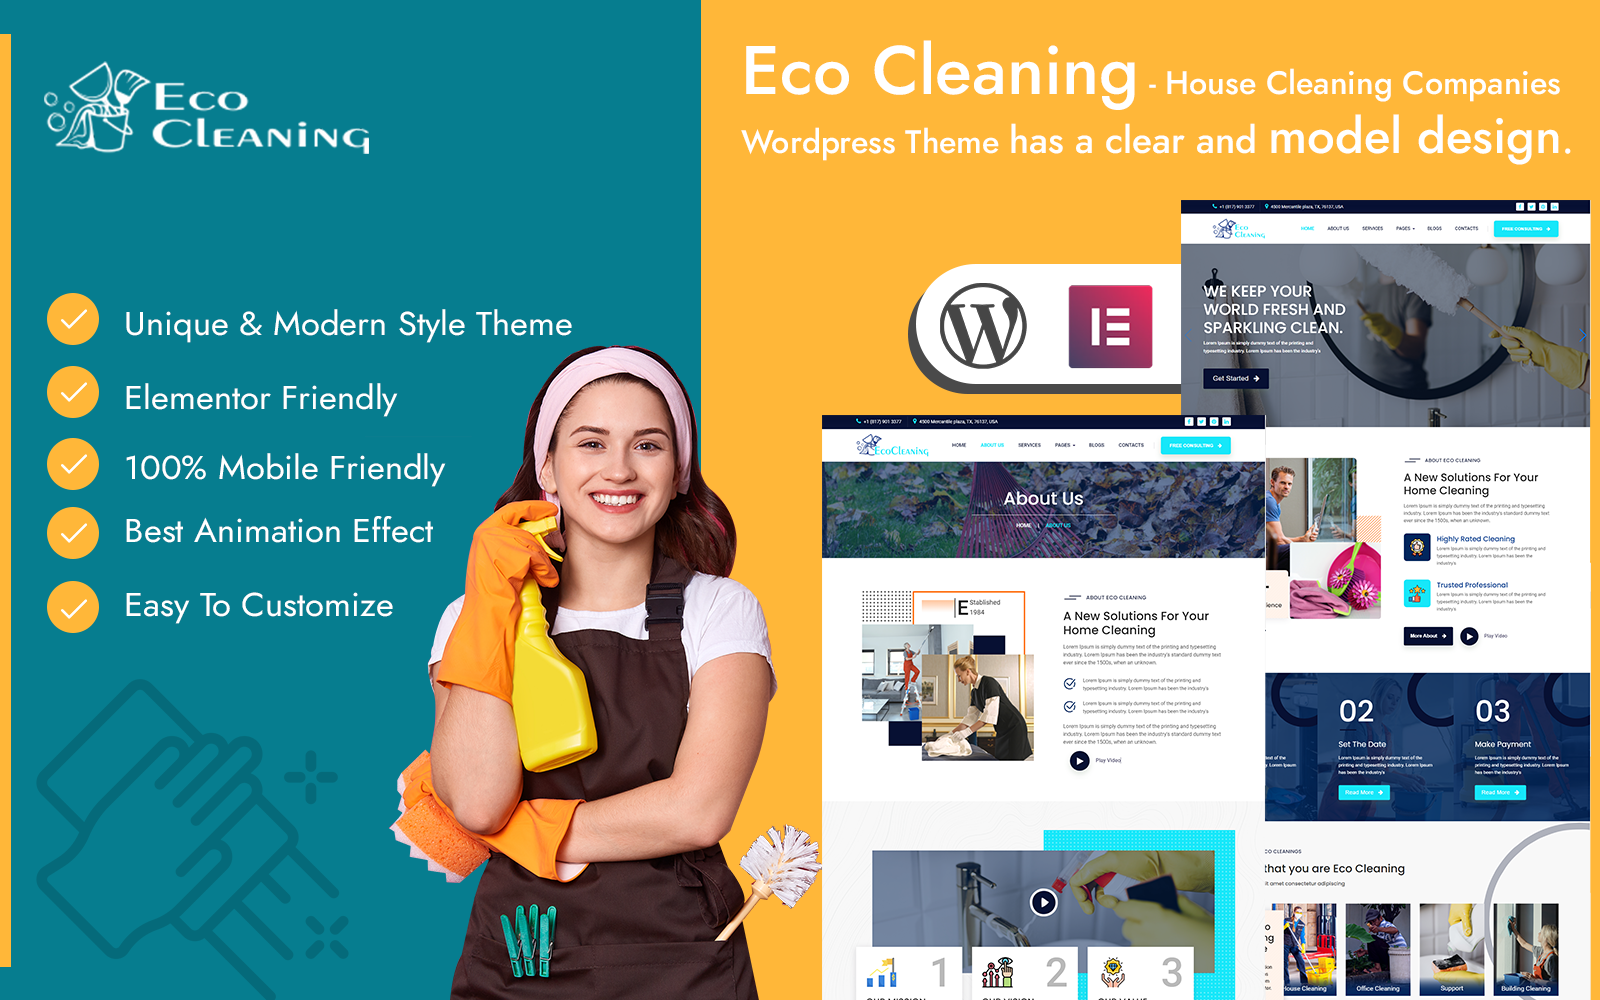 Eco Cleaning – House Cleaning Companies WordPress Theme